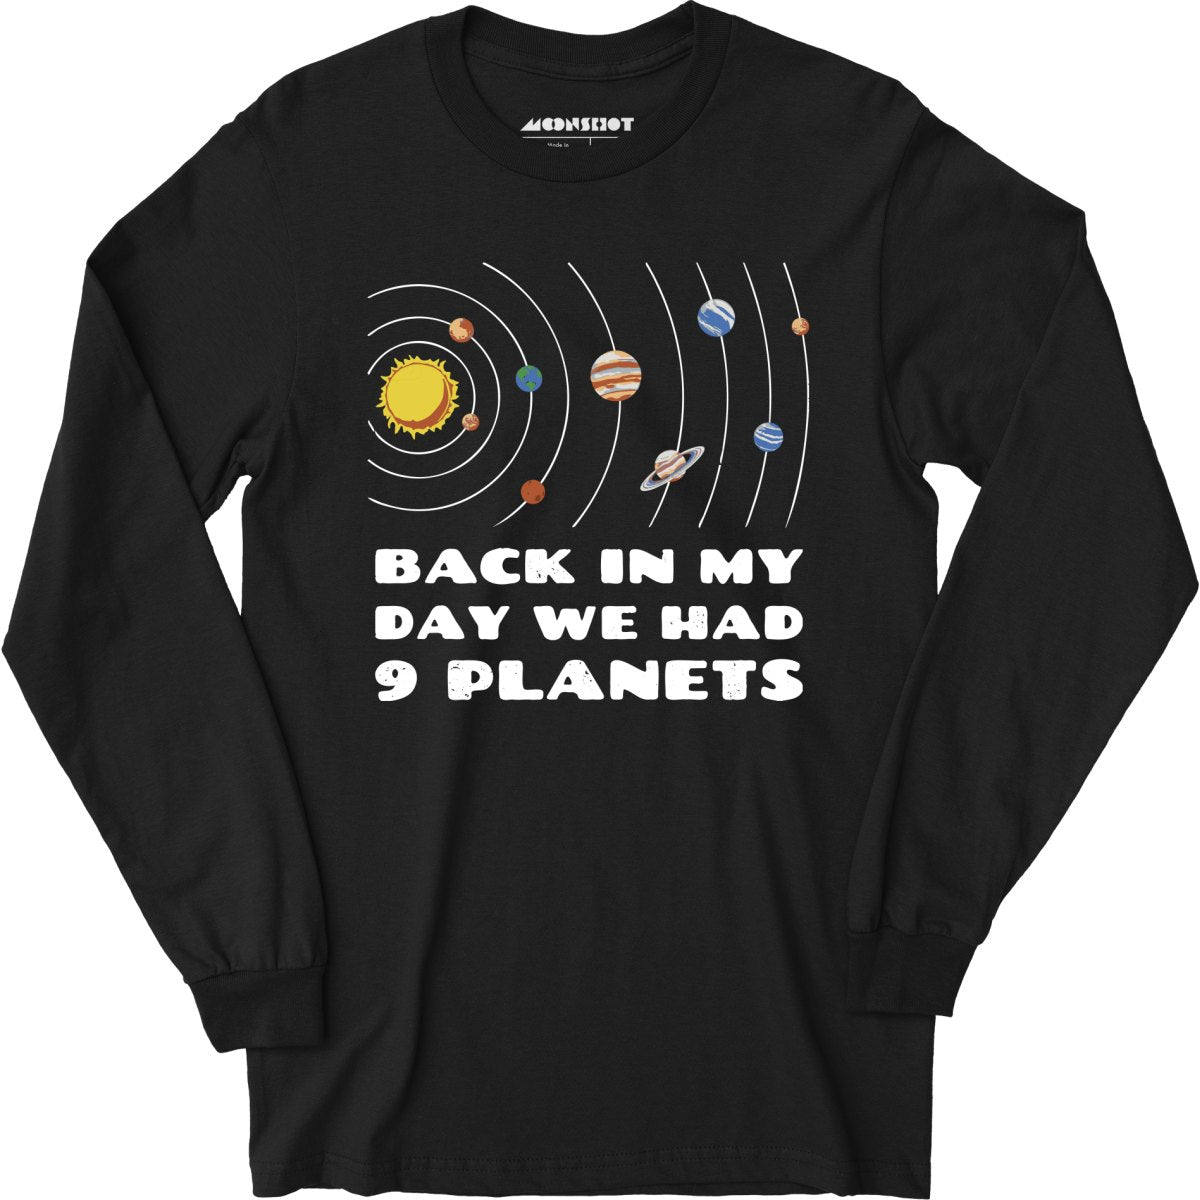 Back in My Day We Had 9 Planets - Long Sleeve T-Shirt